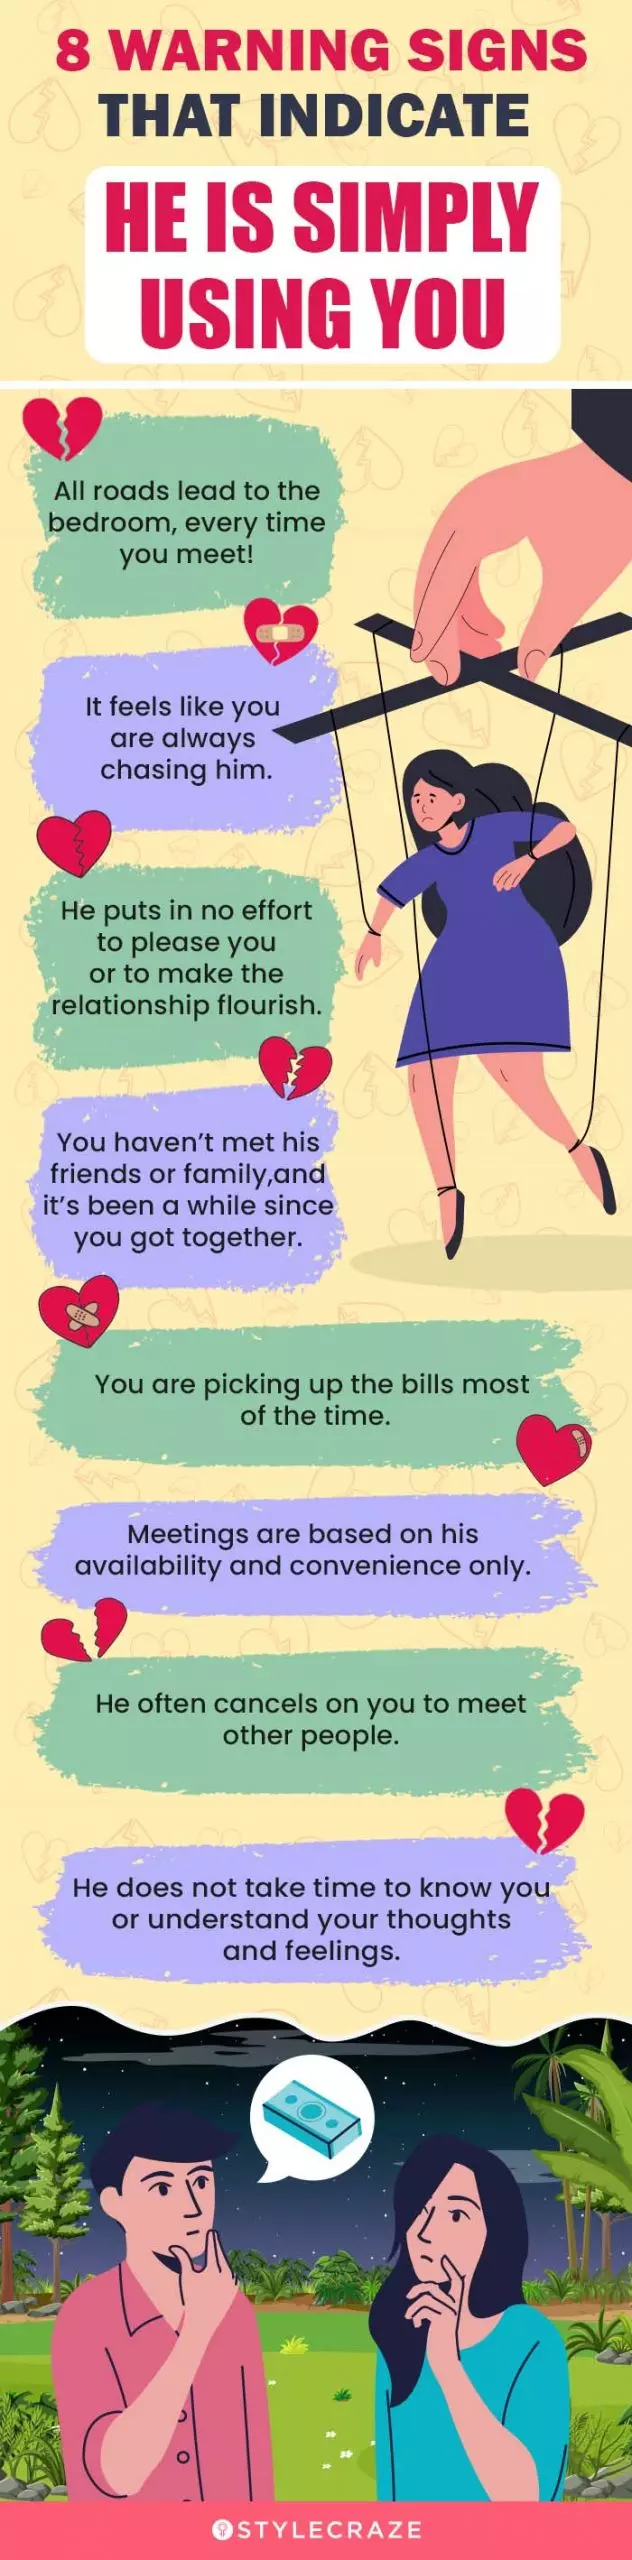 8 warning signs that indicate he is simply using you (infographic)